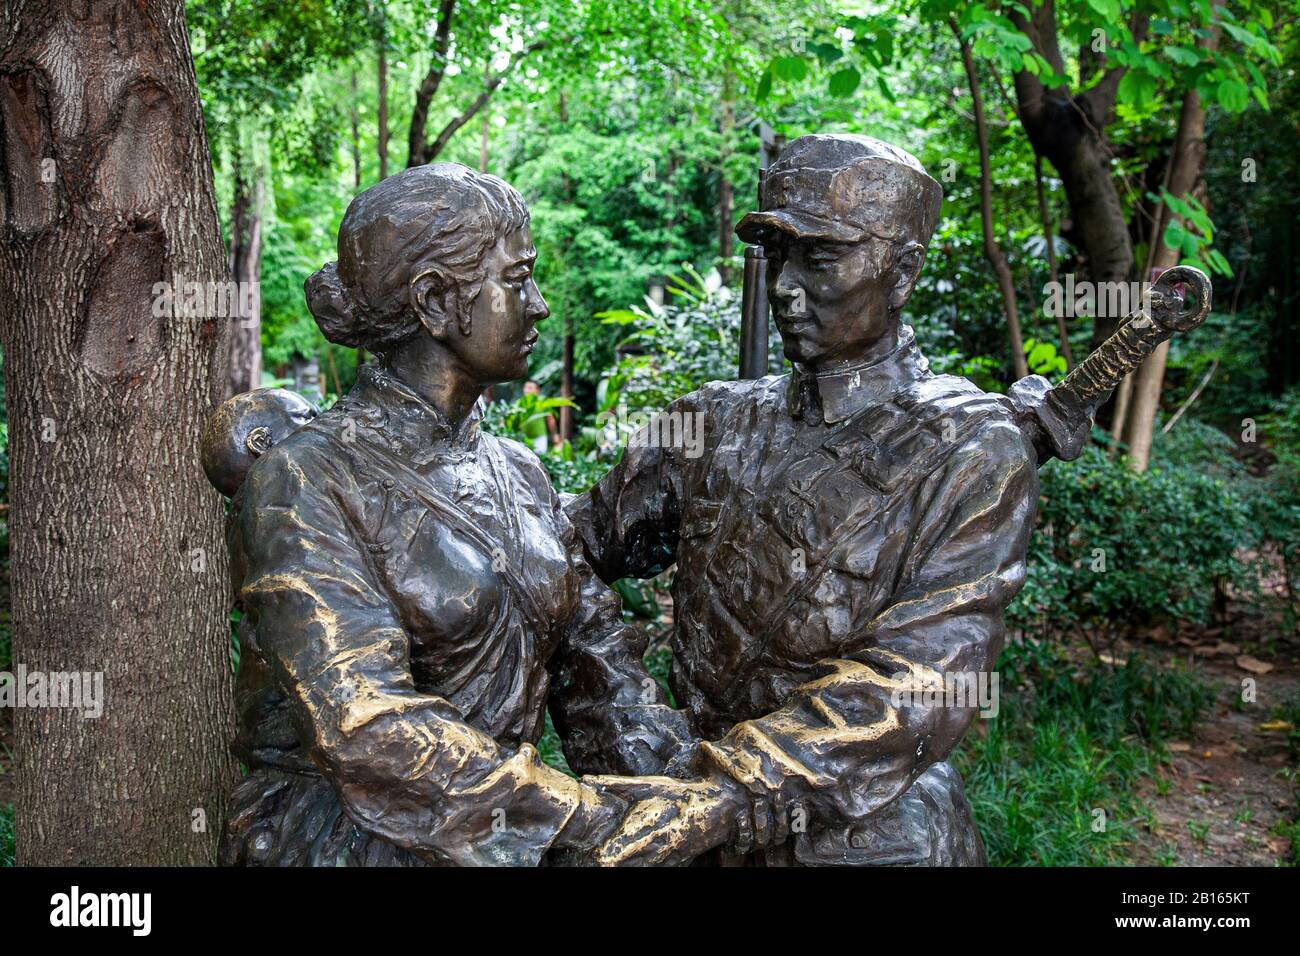 Bronze sculpture showing Chinese Communist soldiers and civilians in Chengdu People's Park China Stock Photo